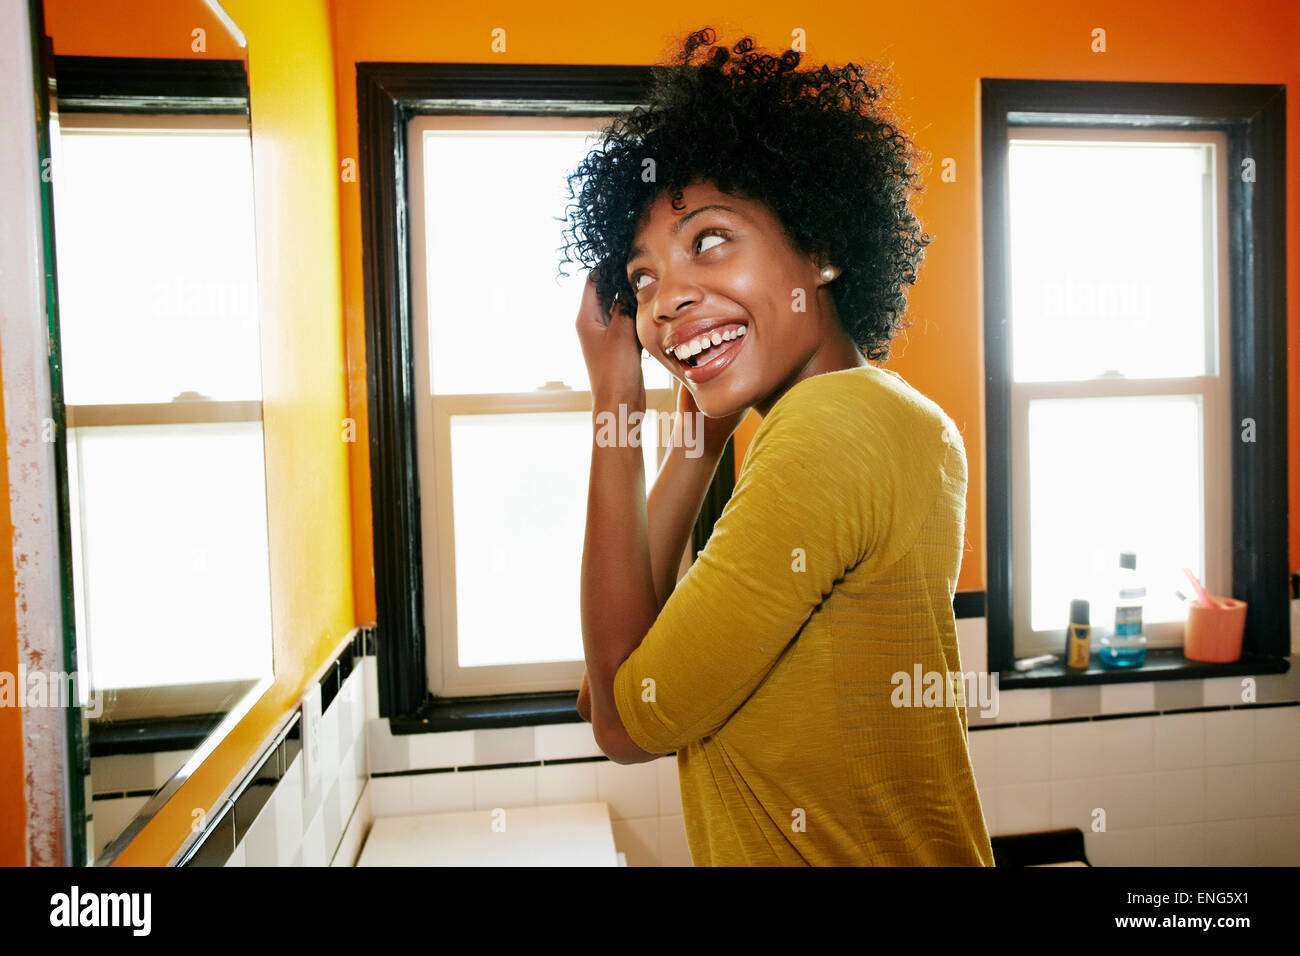 Smiling black woman styling hair in bathroom mirror Stock Photo